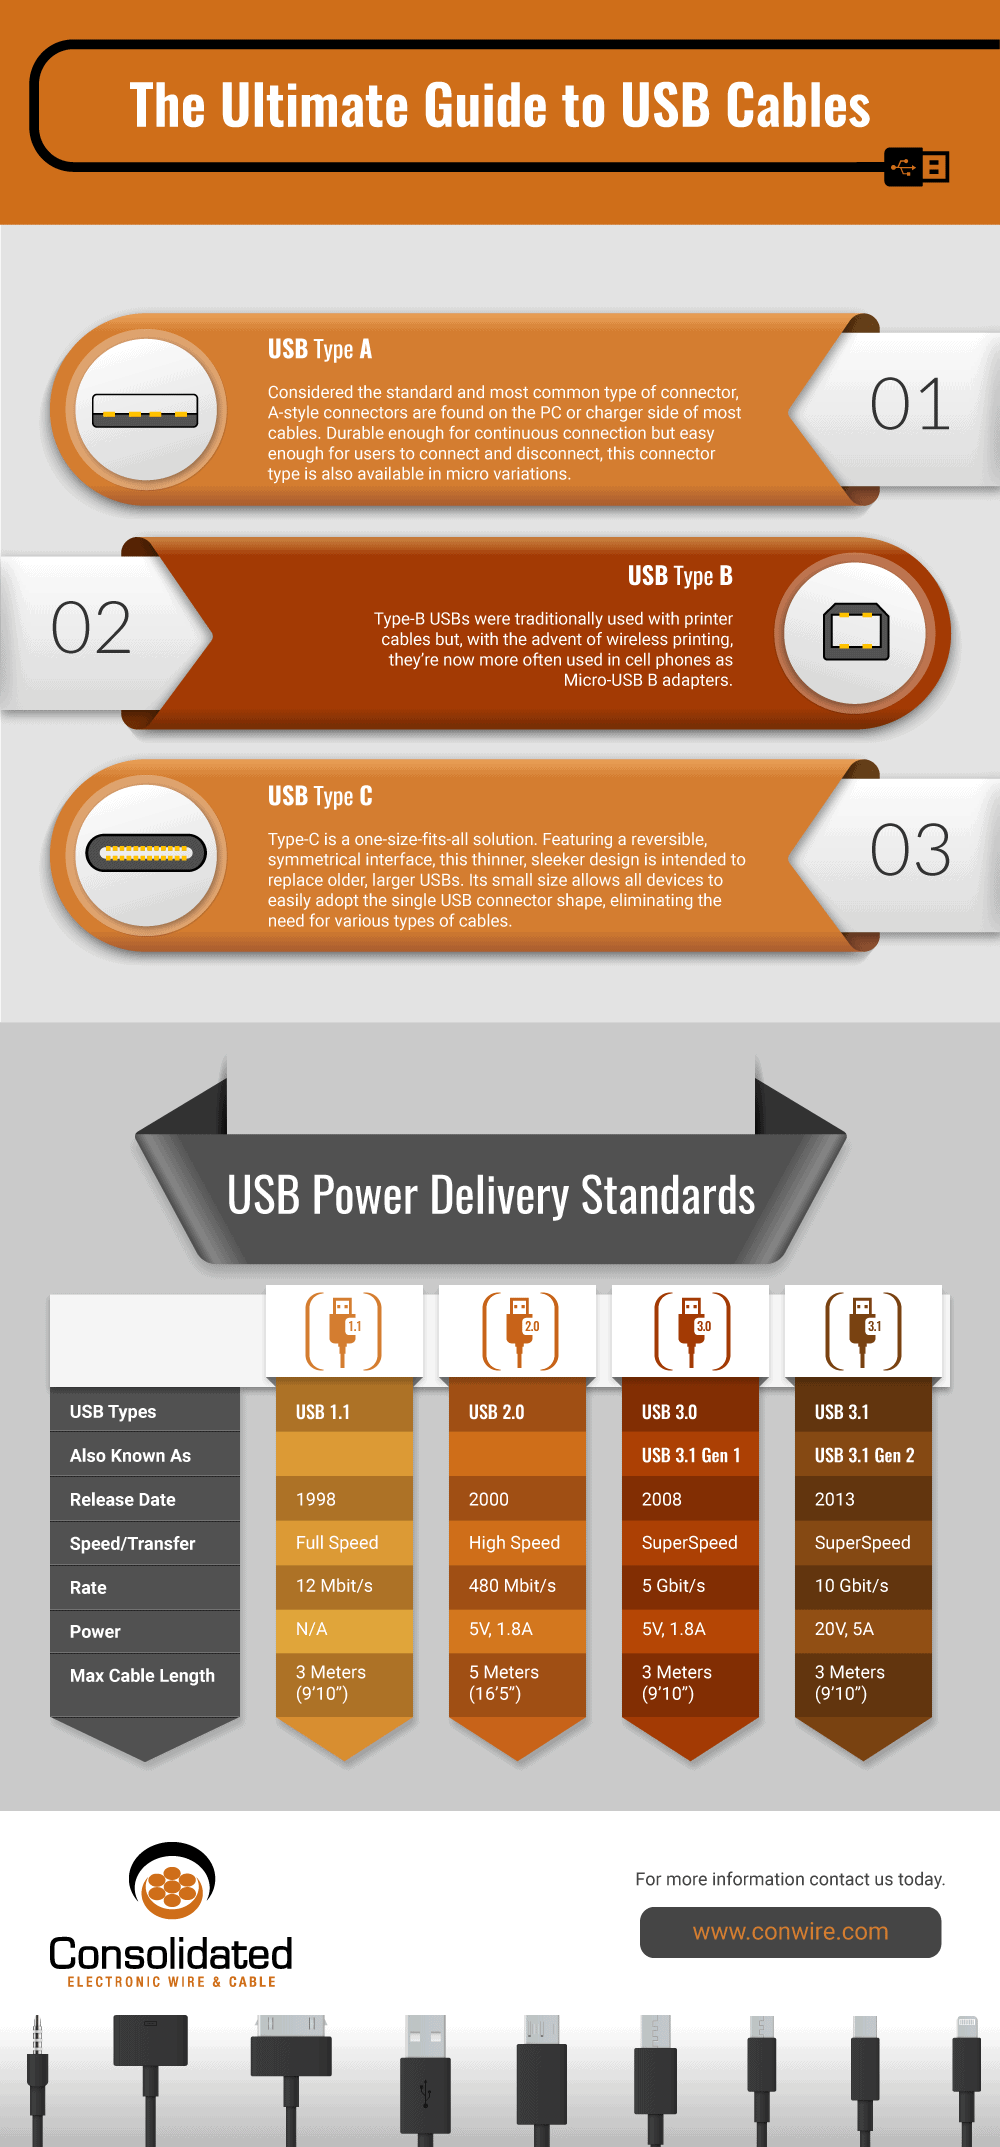 USB-IF Announces New Certified USB Type-C® Cable Power Rating